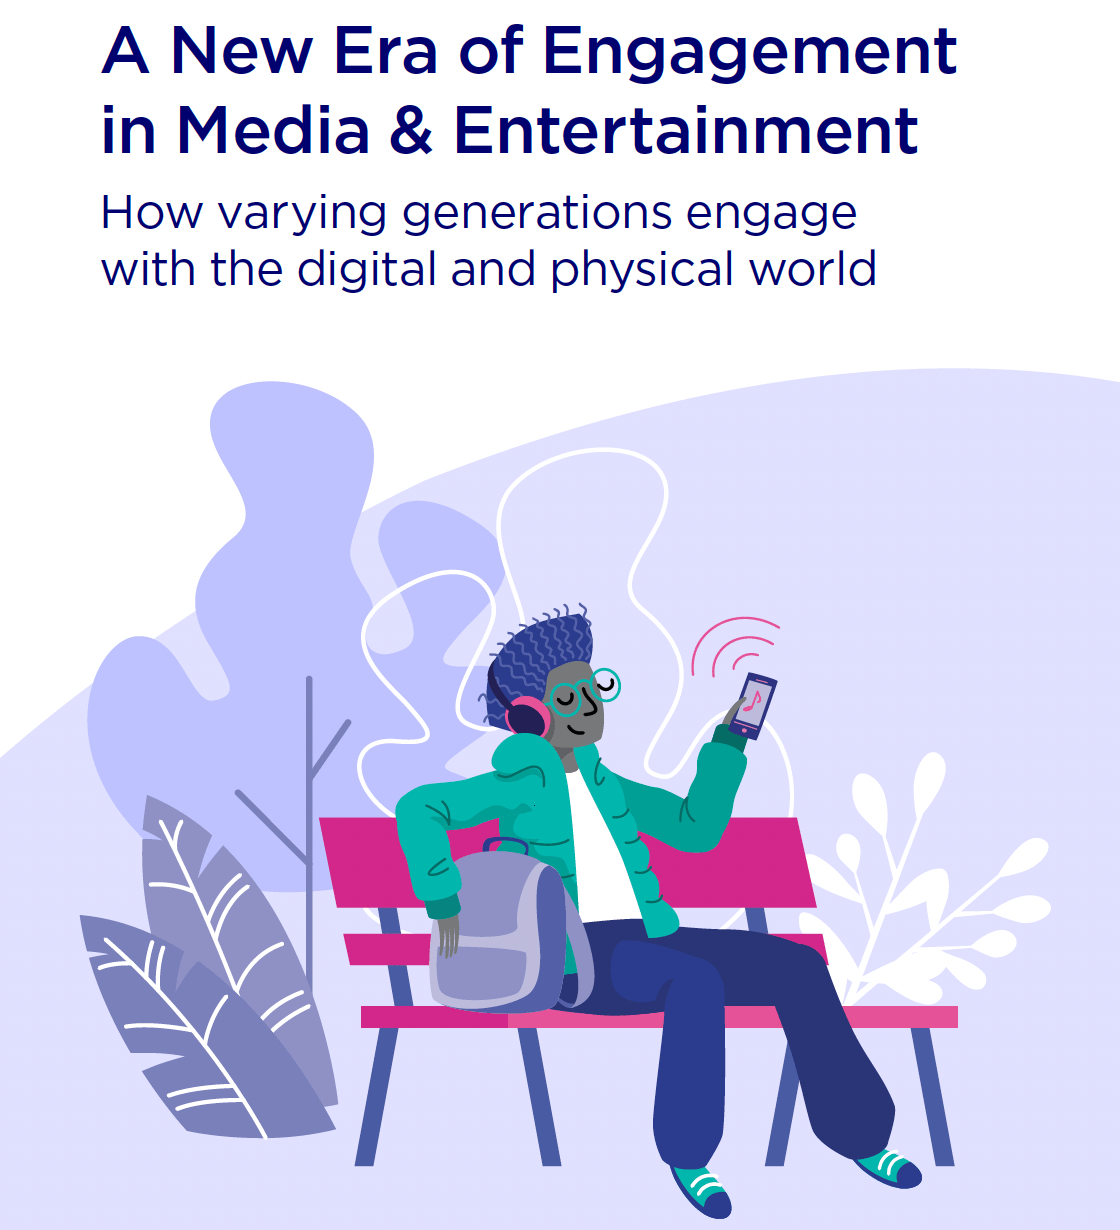 Media and entertainment: how do people engage with  in the digital and physical worlds?